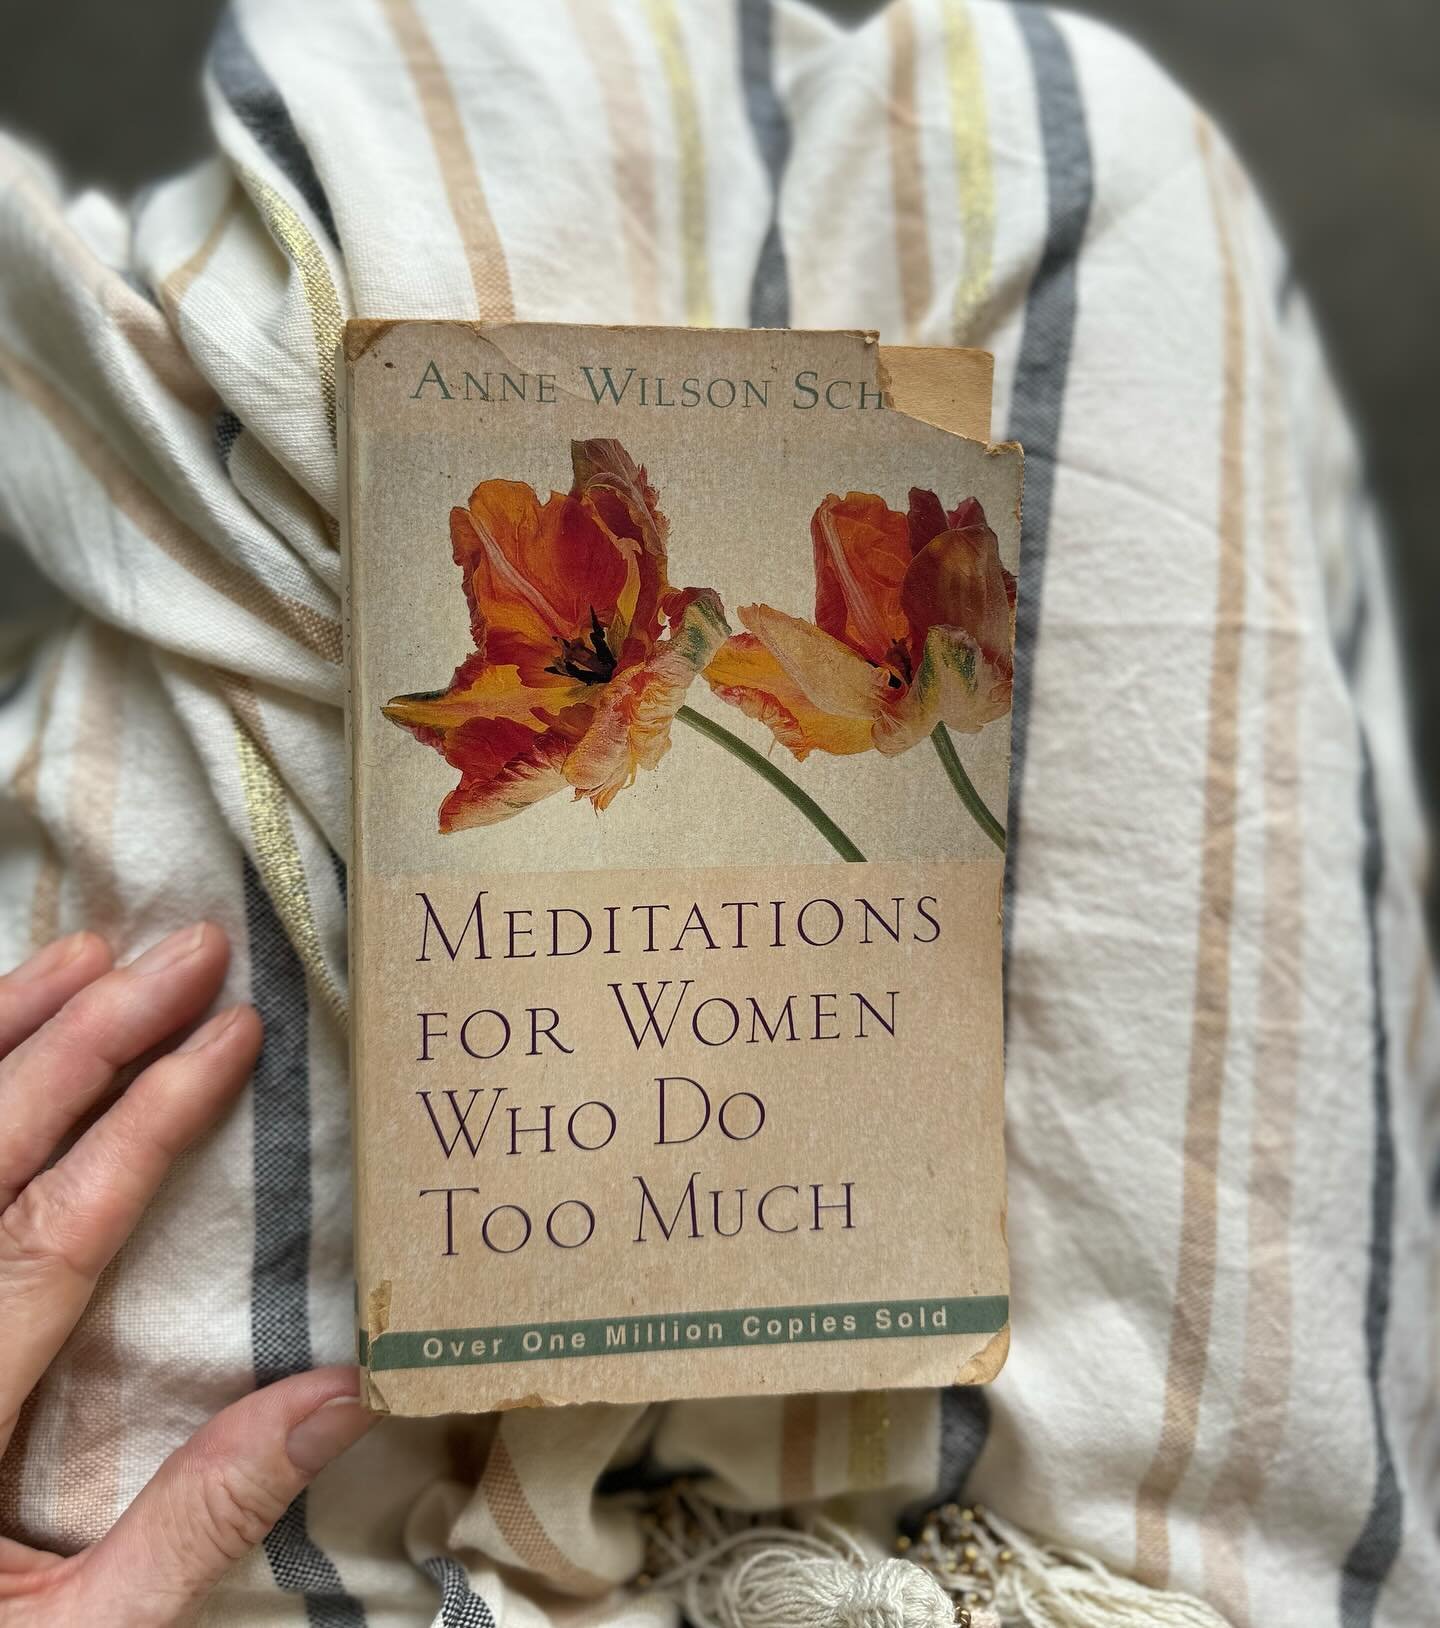 This book keeps reappearing at just the right moments to remind me and so I&rsquo;m taking a moment to offer you a few questions to reflect and perhaps journal on.

Does it feel to you that you are doing too much? What&rsquo;s the impact on you? (Tir